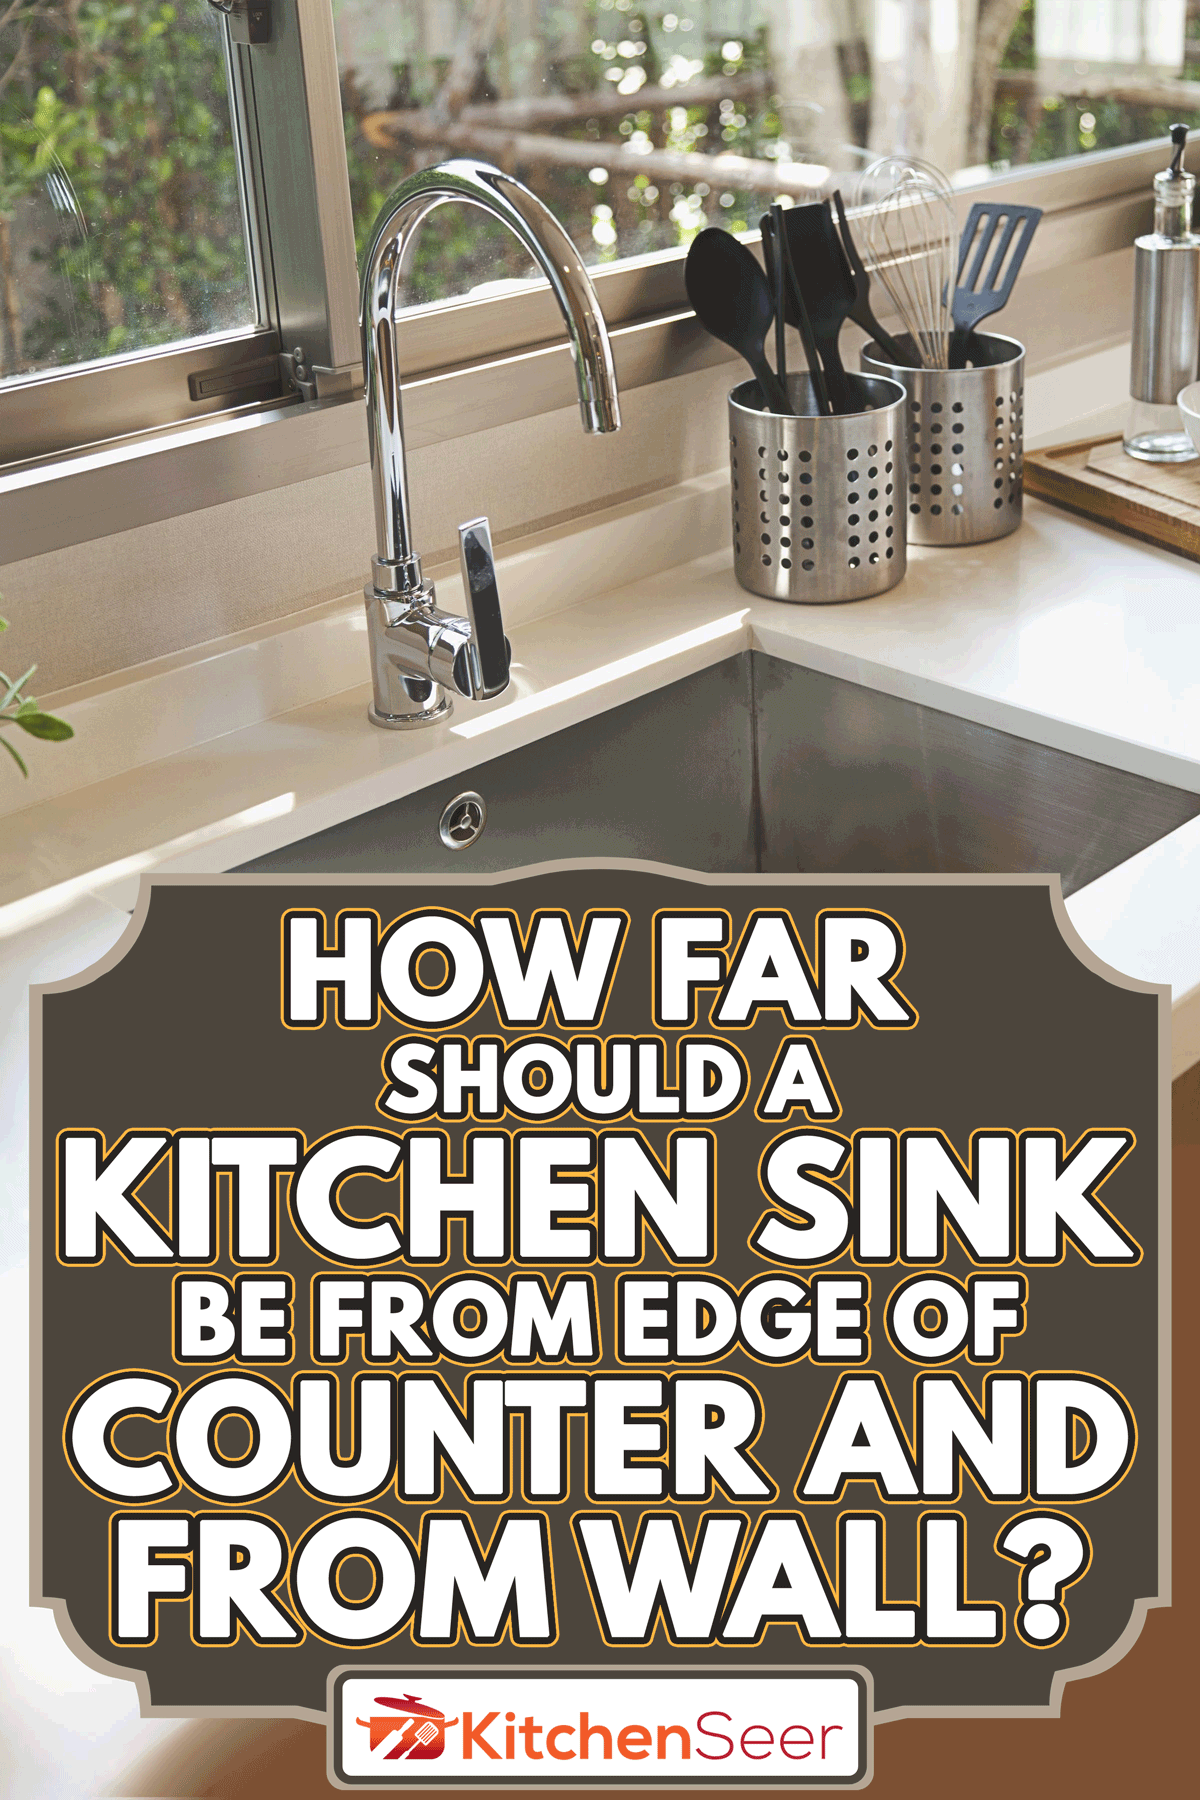 Kitchen sink and faucet on the kitchen, How Far Should A Kitchen Sink Be From Edge Of Counter And From Wall?